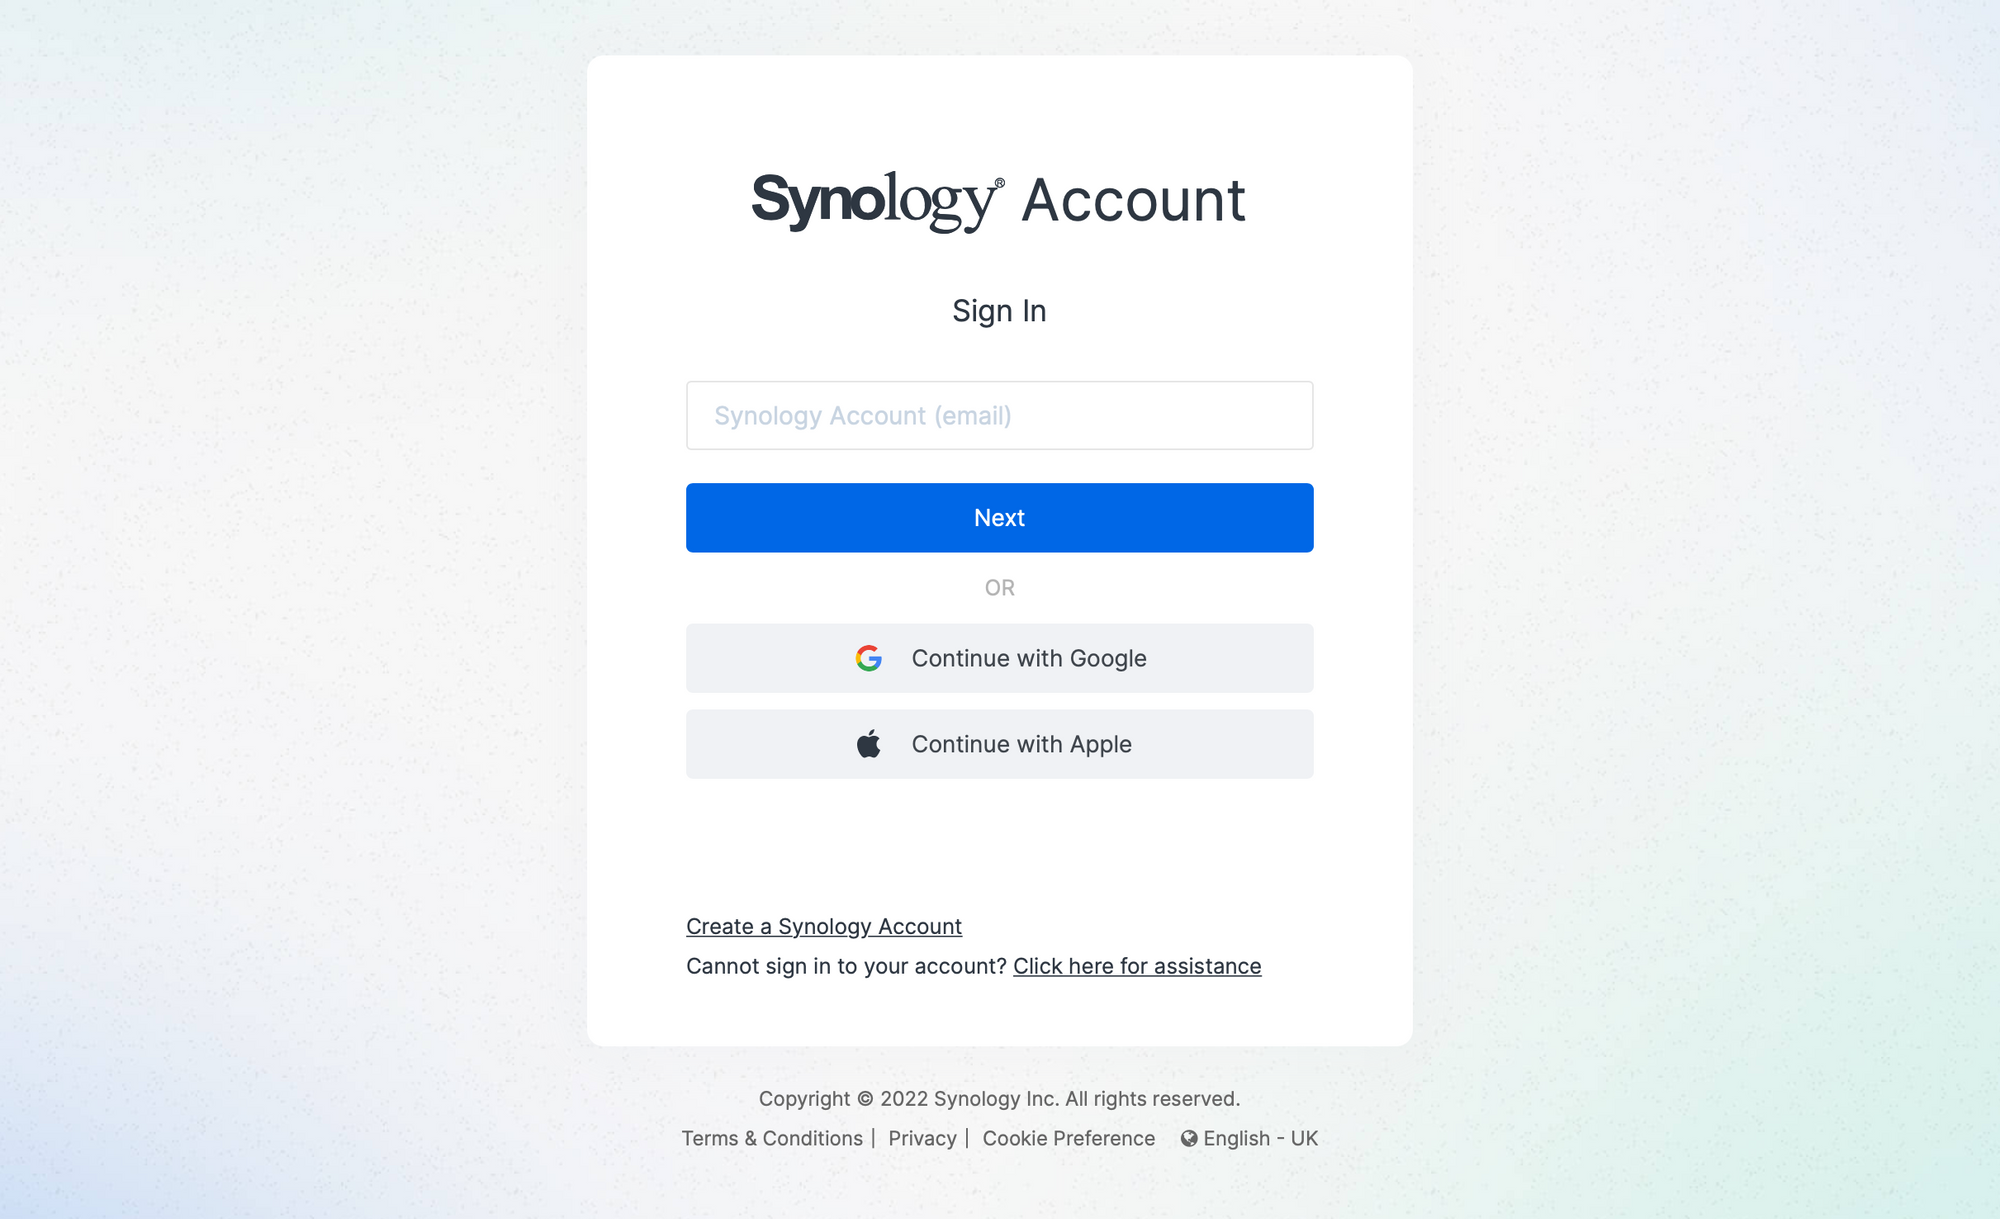 What to Do If You Forget Synology Account Password?